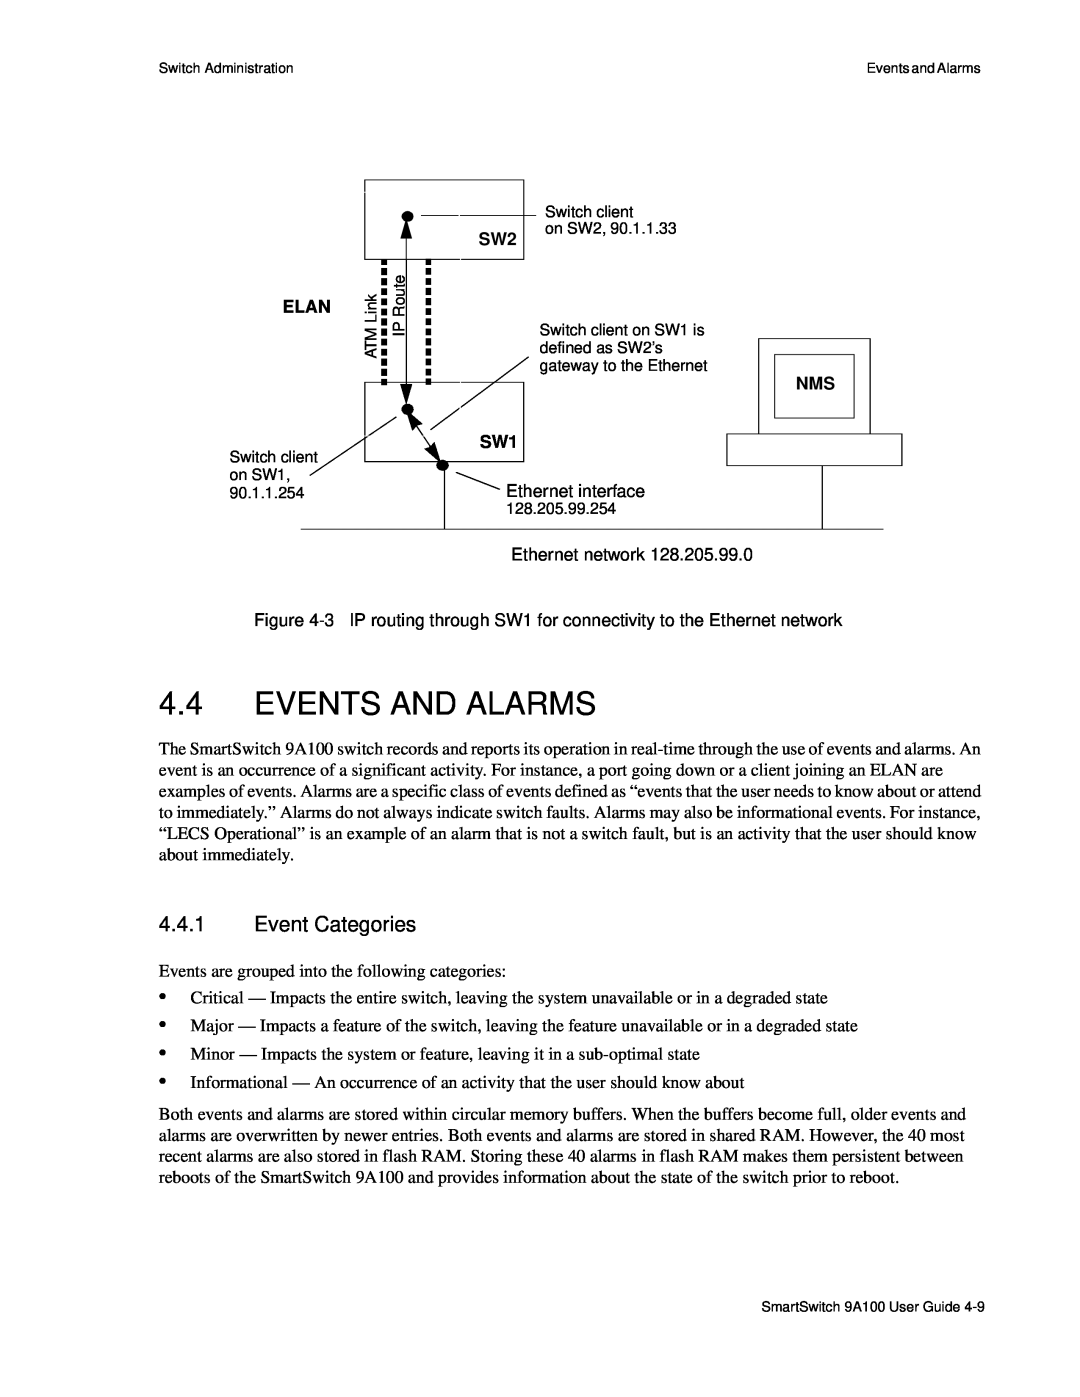 Cabletron Systems 9A100 manual Events And Alarms, Event Categories 